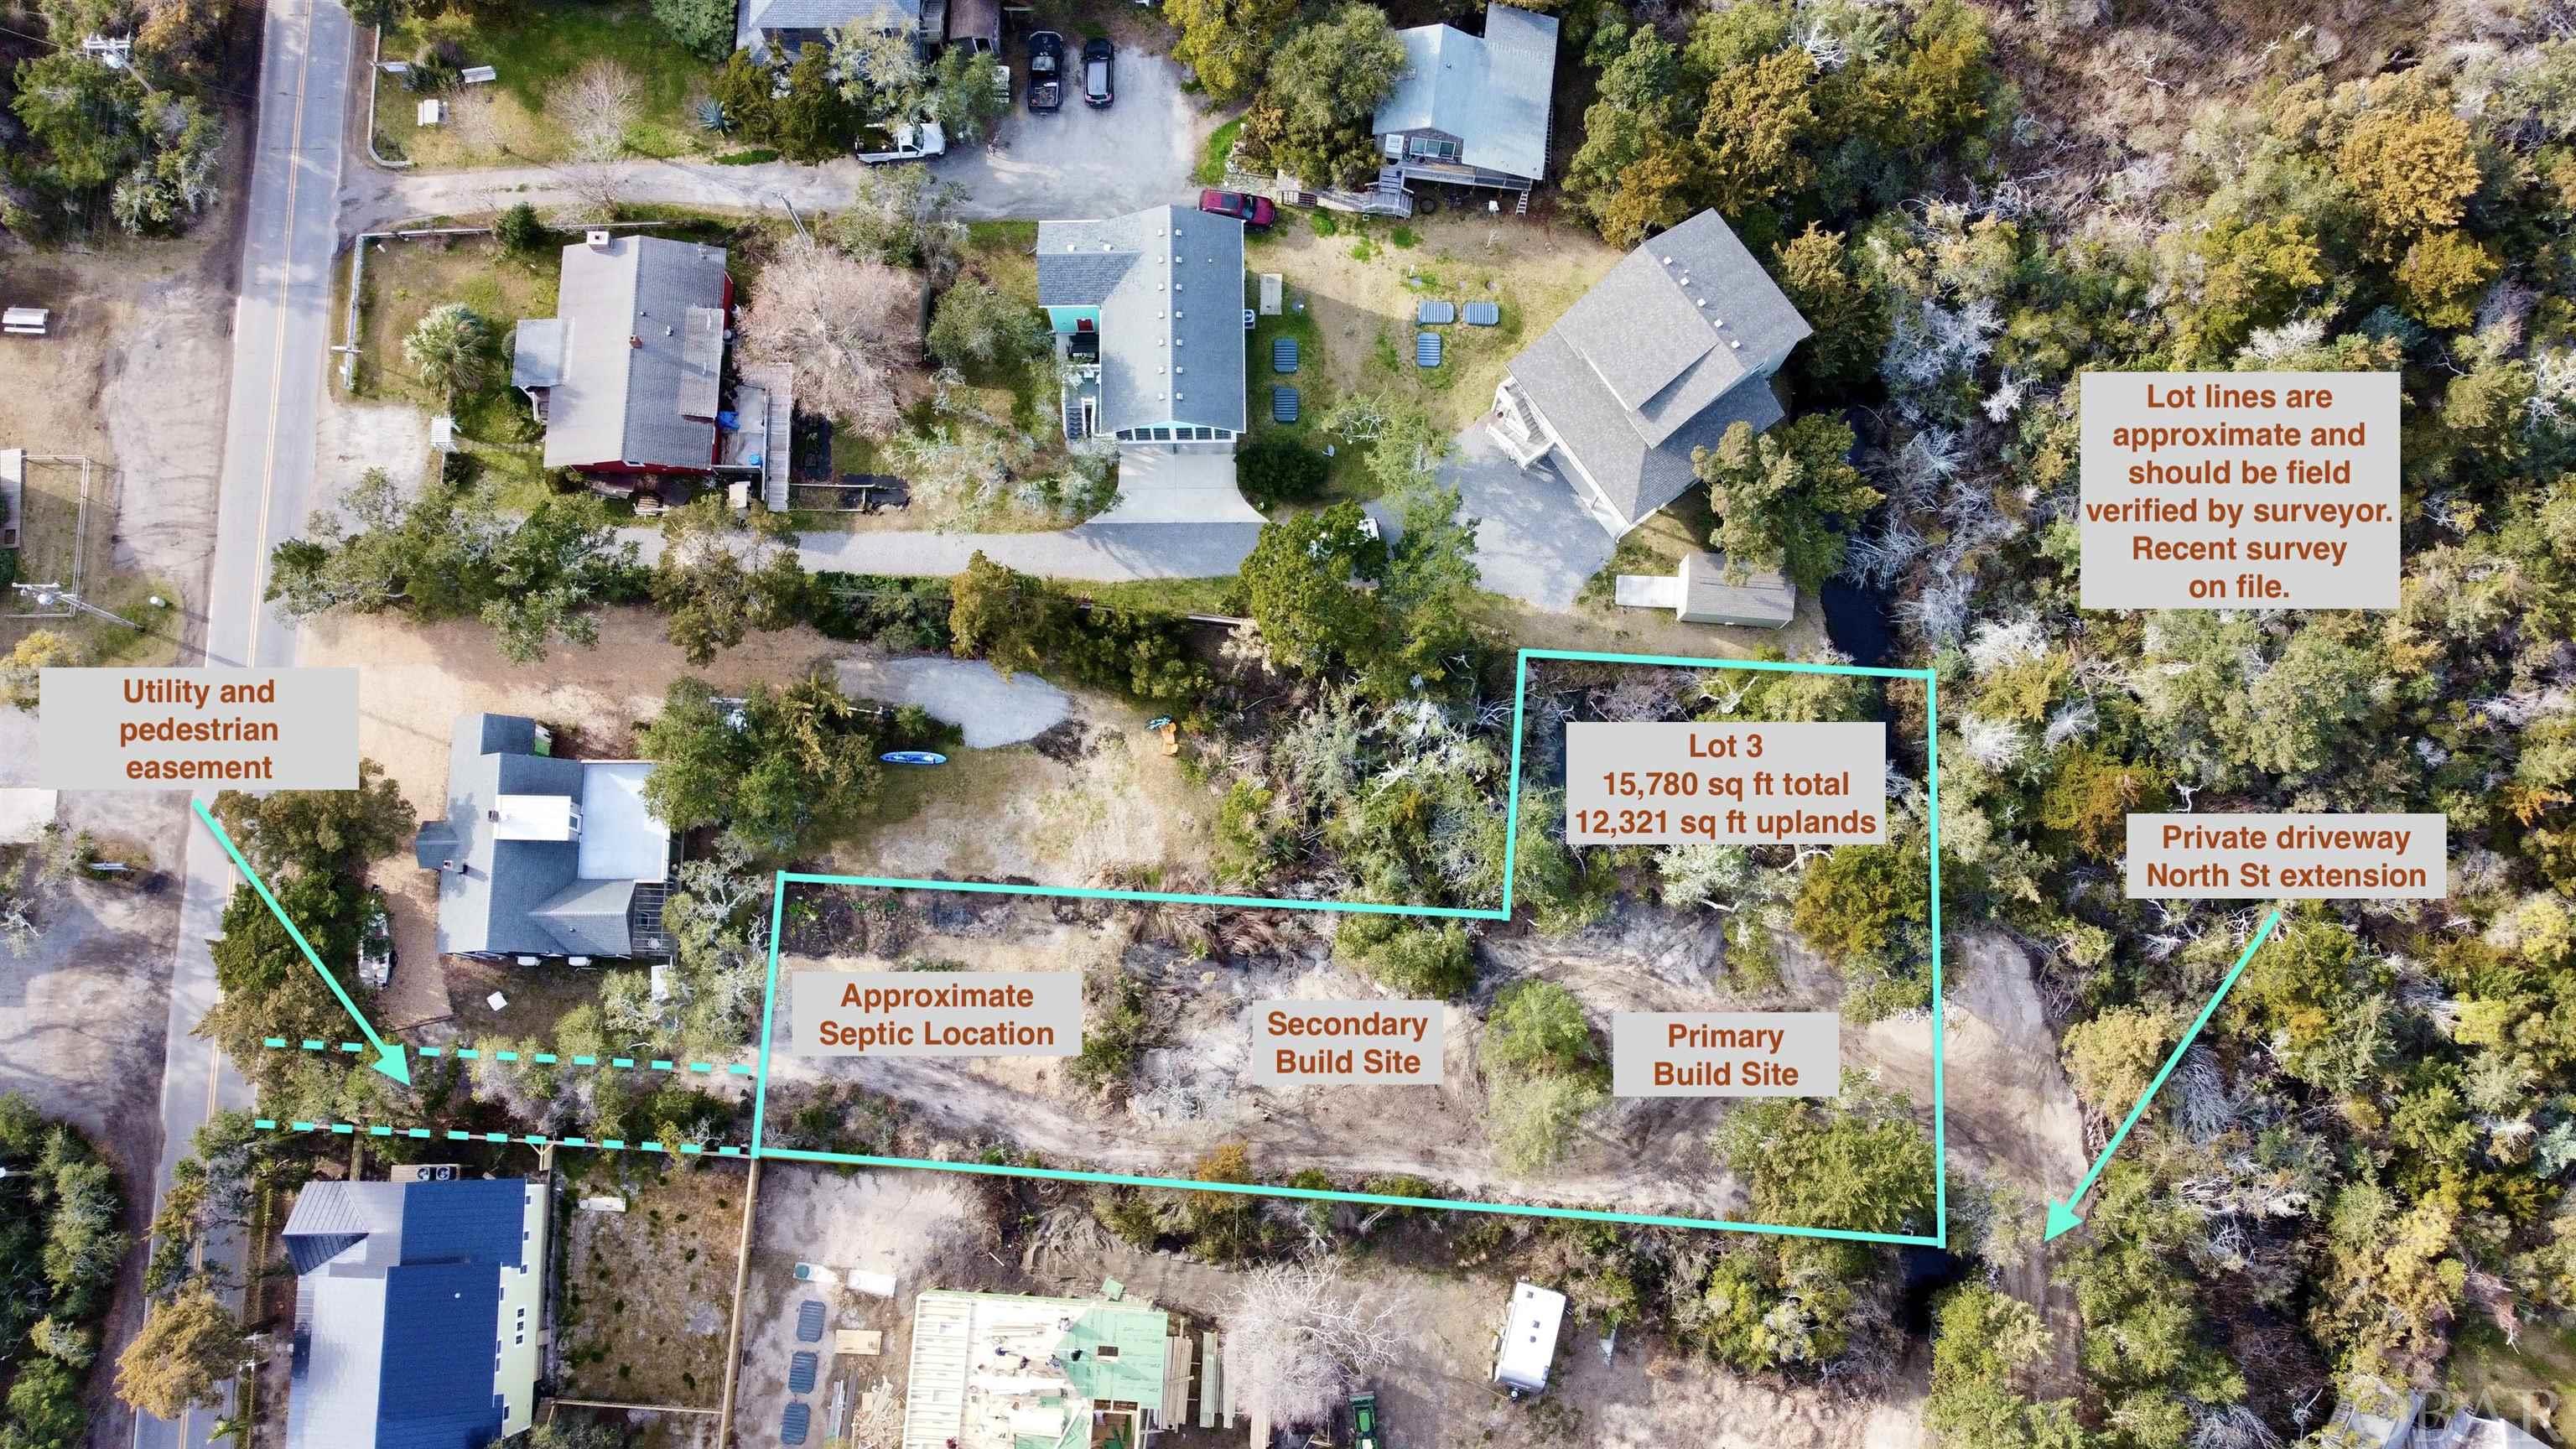 Large building lot in the heart of the village, close to all the happenings of Back Rd. Nature abounds this ready to build parcel with adjacent salt marsh and minimal neighbors attracting flora and fauna. Over 15,000 square feet provides plenty of space to build your dream home around the existing majestic live oaks. Permitted for 5 bedrooms! New owner could spread out bedroom allotment across multiple homes on this lot. Build a home for yourself and a detached mother-in-law suite or vacation rental. Includes a utility and pedestrian easement from Back Rd. Access to property is through North St. extension. Survey and 5 bedroom septic permit on file. Property contains 12,321 sq ft of buildable uplands and 2,807 sq ft of 404 and CAMA wetlands. Come build your dream!